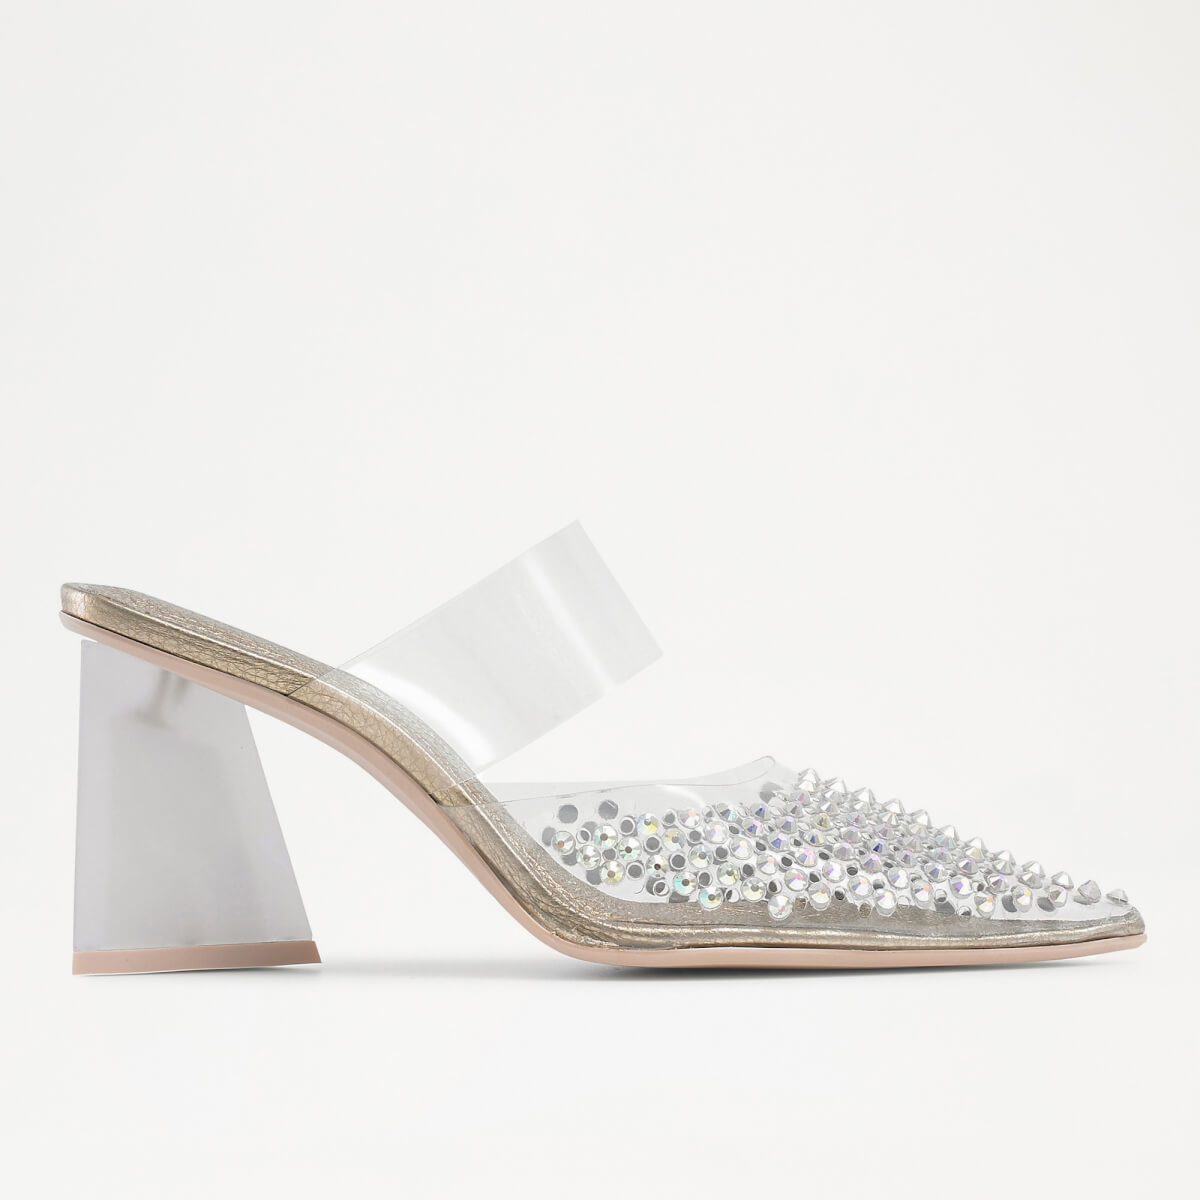 Russell & Bromley Women's White VISUALISE Vinyl Embellished Pump Mule, Size: UK 3